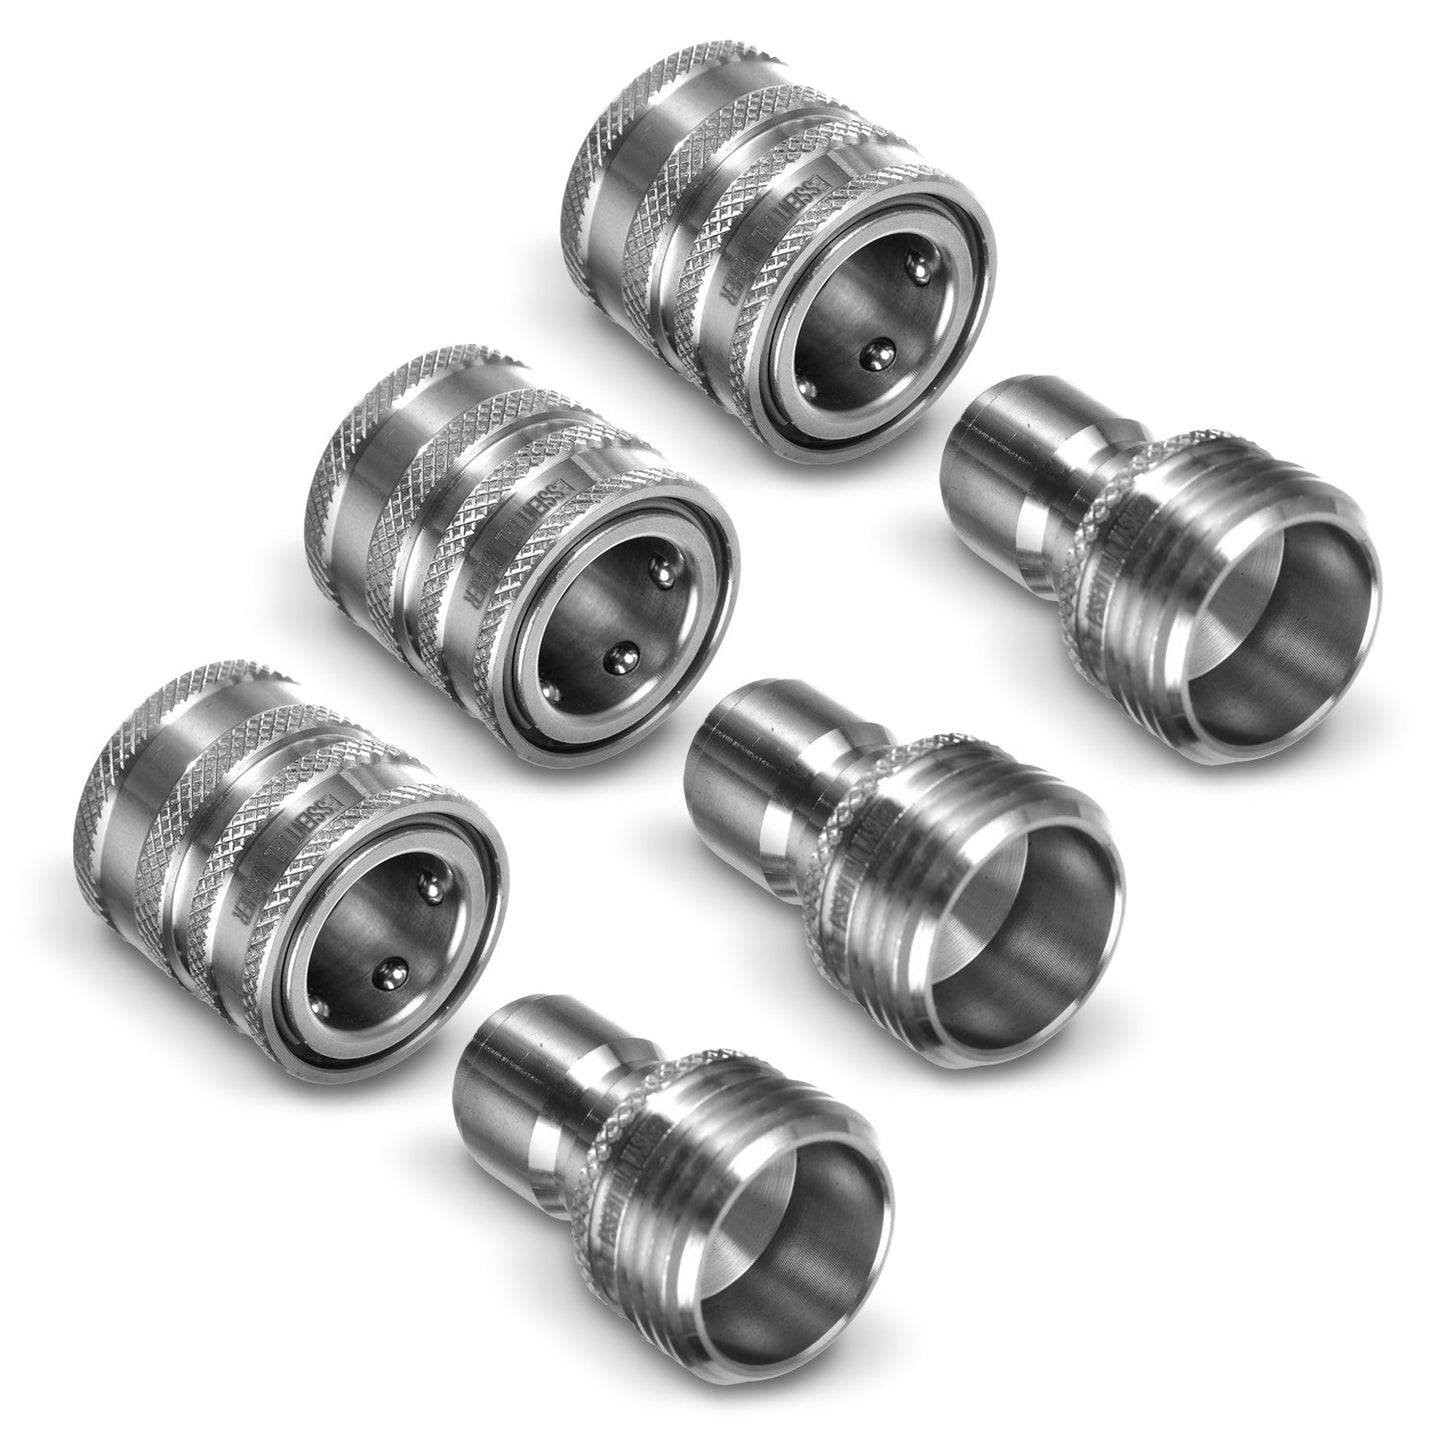 Garden Hose Quick Connect Set | Premium Solid Stainless Steel 3/4" Hose Fittings